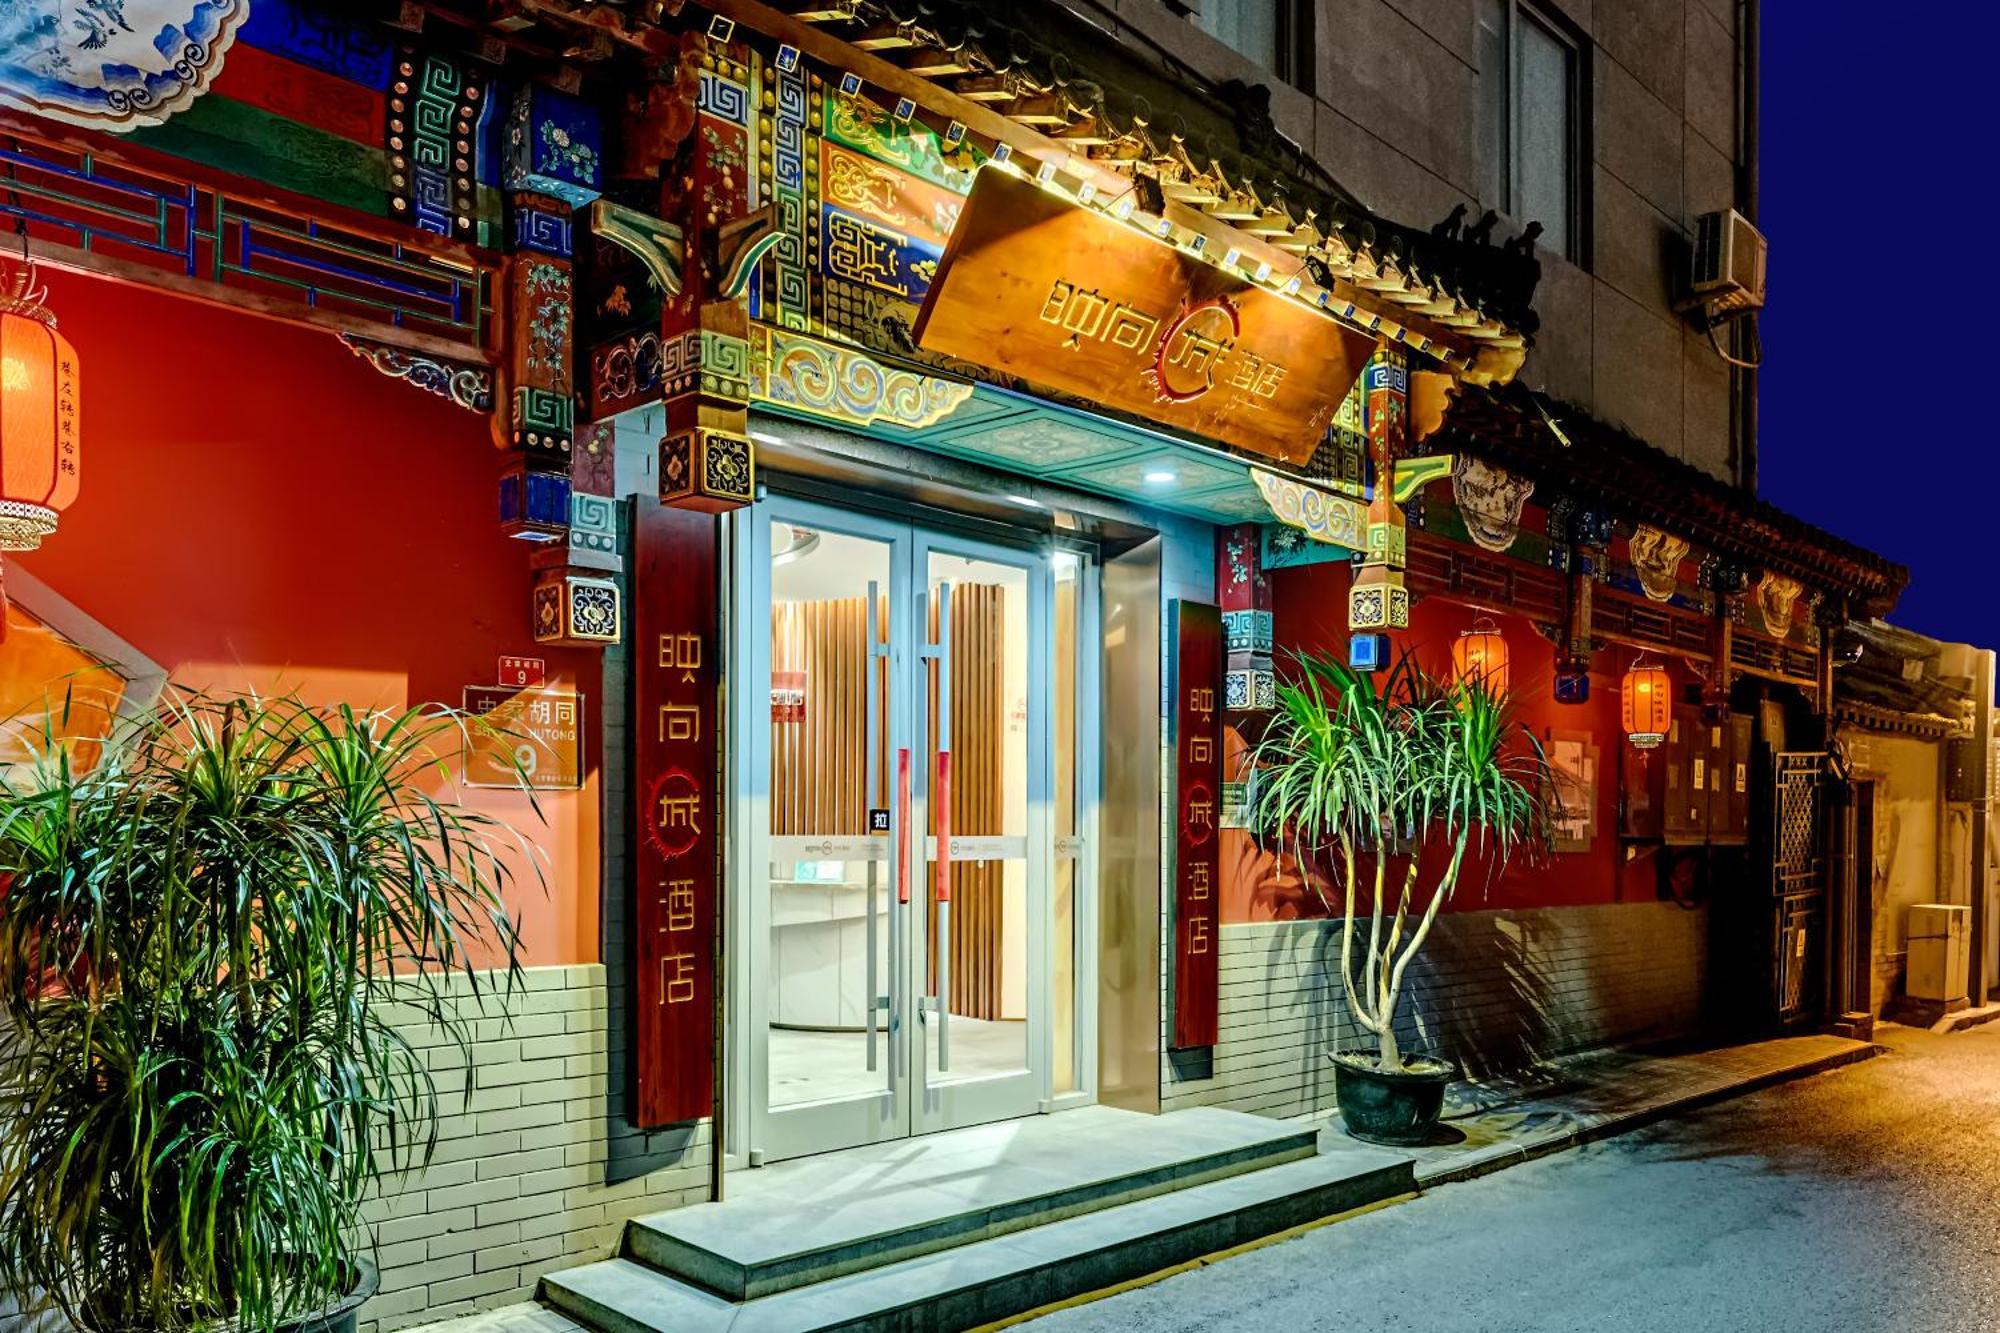 Happy Dragon City Culture Hotel -In The City Center With Ticket Service&Food Recommendation,Near Tian'Anmen Forbidden City,Wangfujing Walking Street,Easy To Get Any Tour Sights In 北京 エクステリア 写真